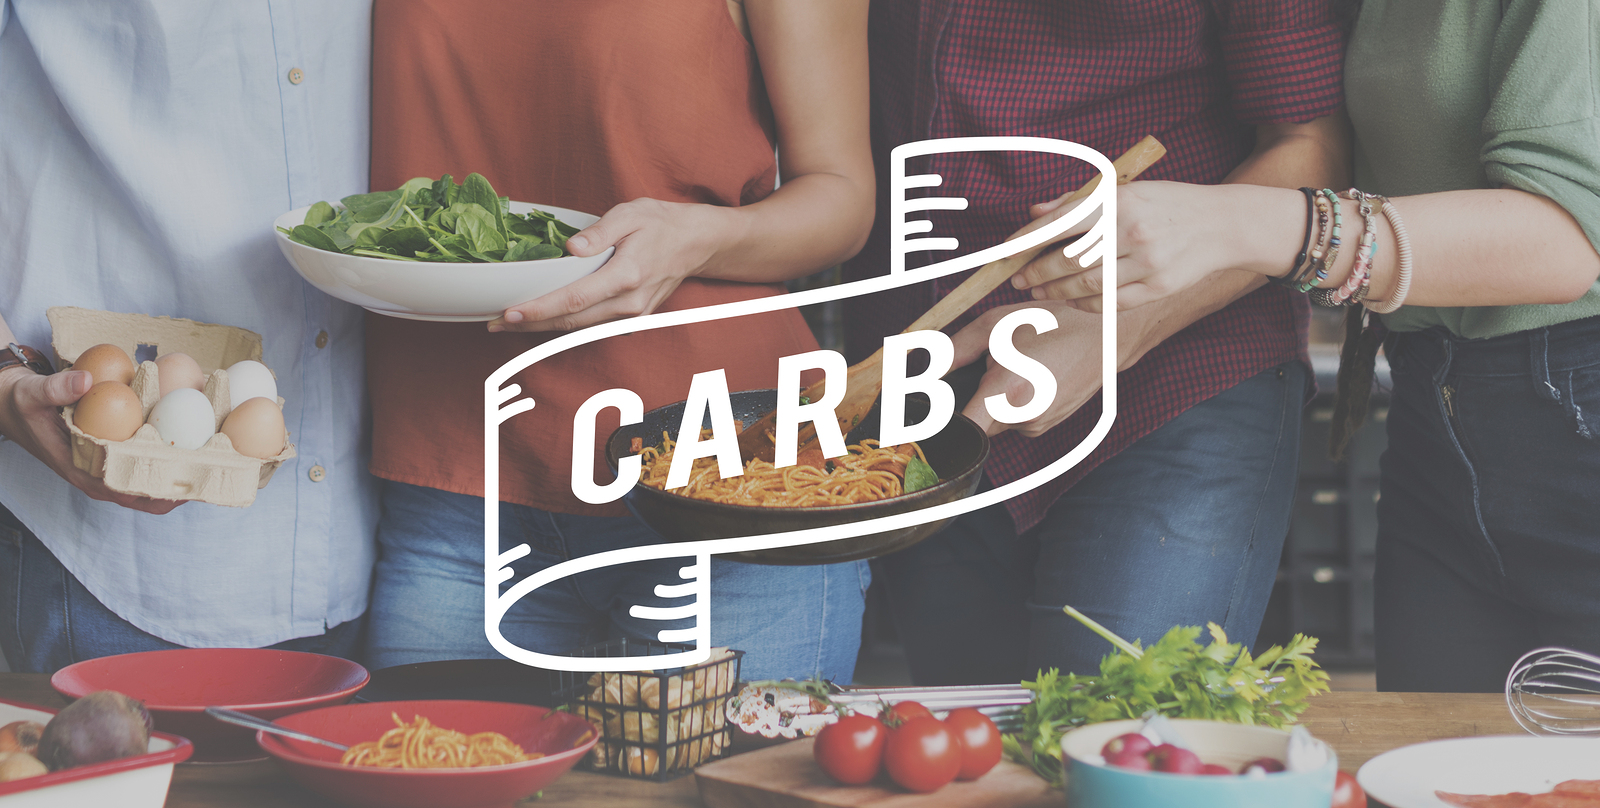 My Take-Away on Carb Cycling